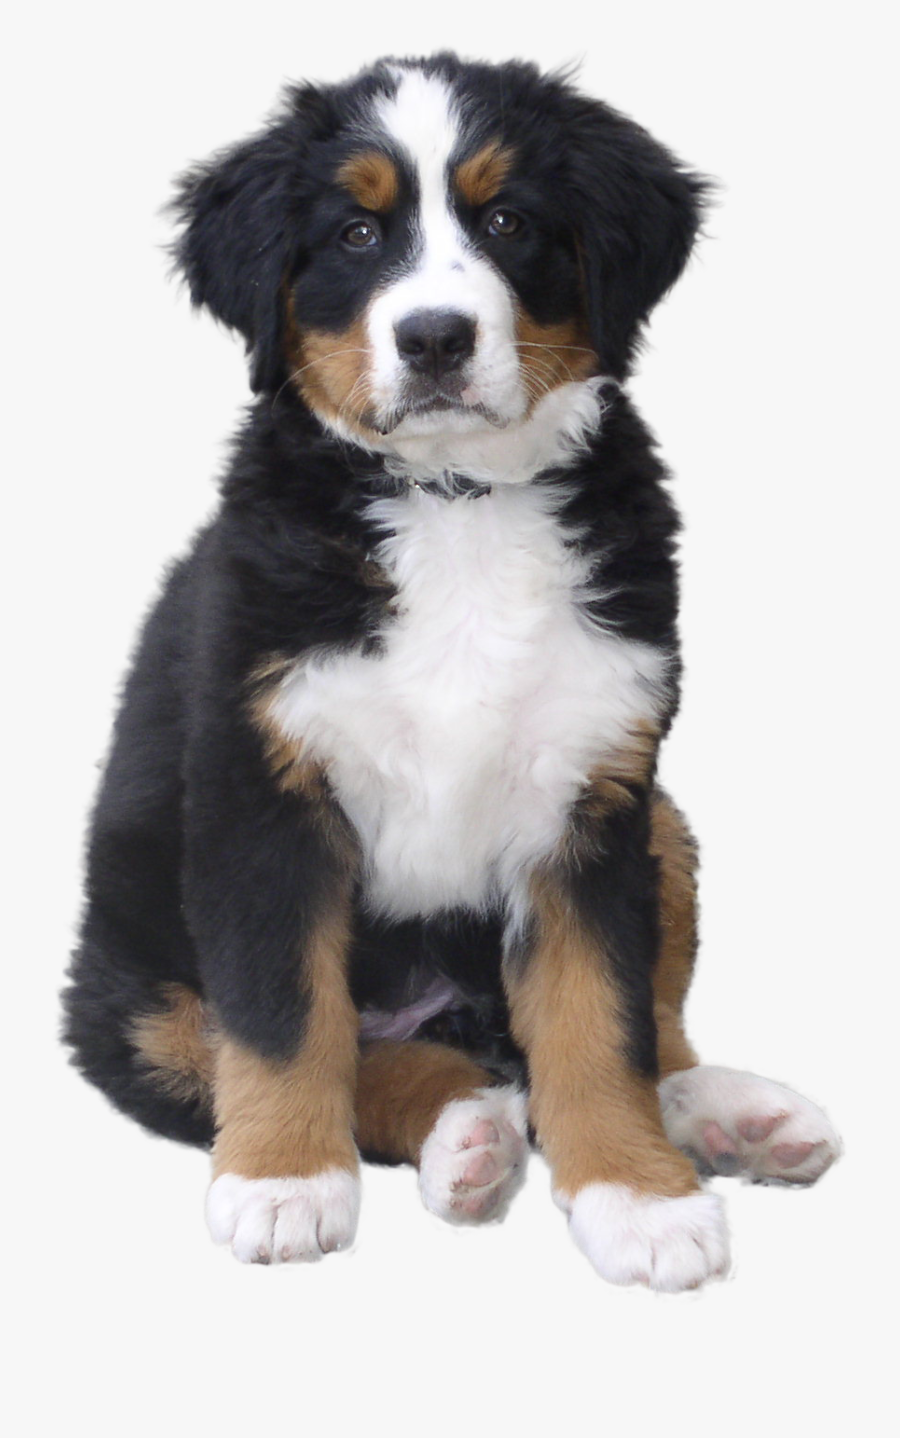 Mountain Greater Breed Dog Bernese Swiss Puppy Clipart - Dog Transparent Background, Transparent Clipart